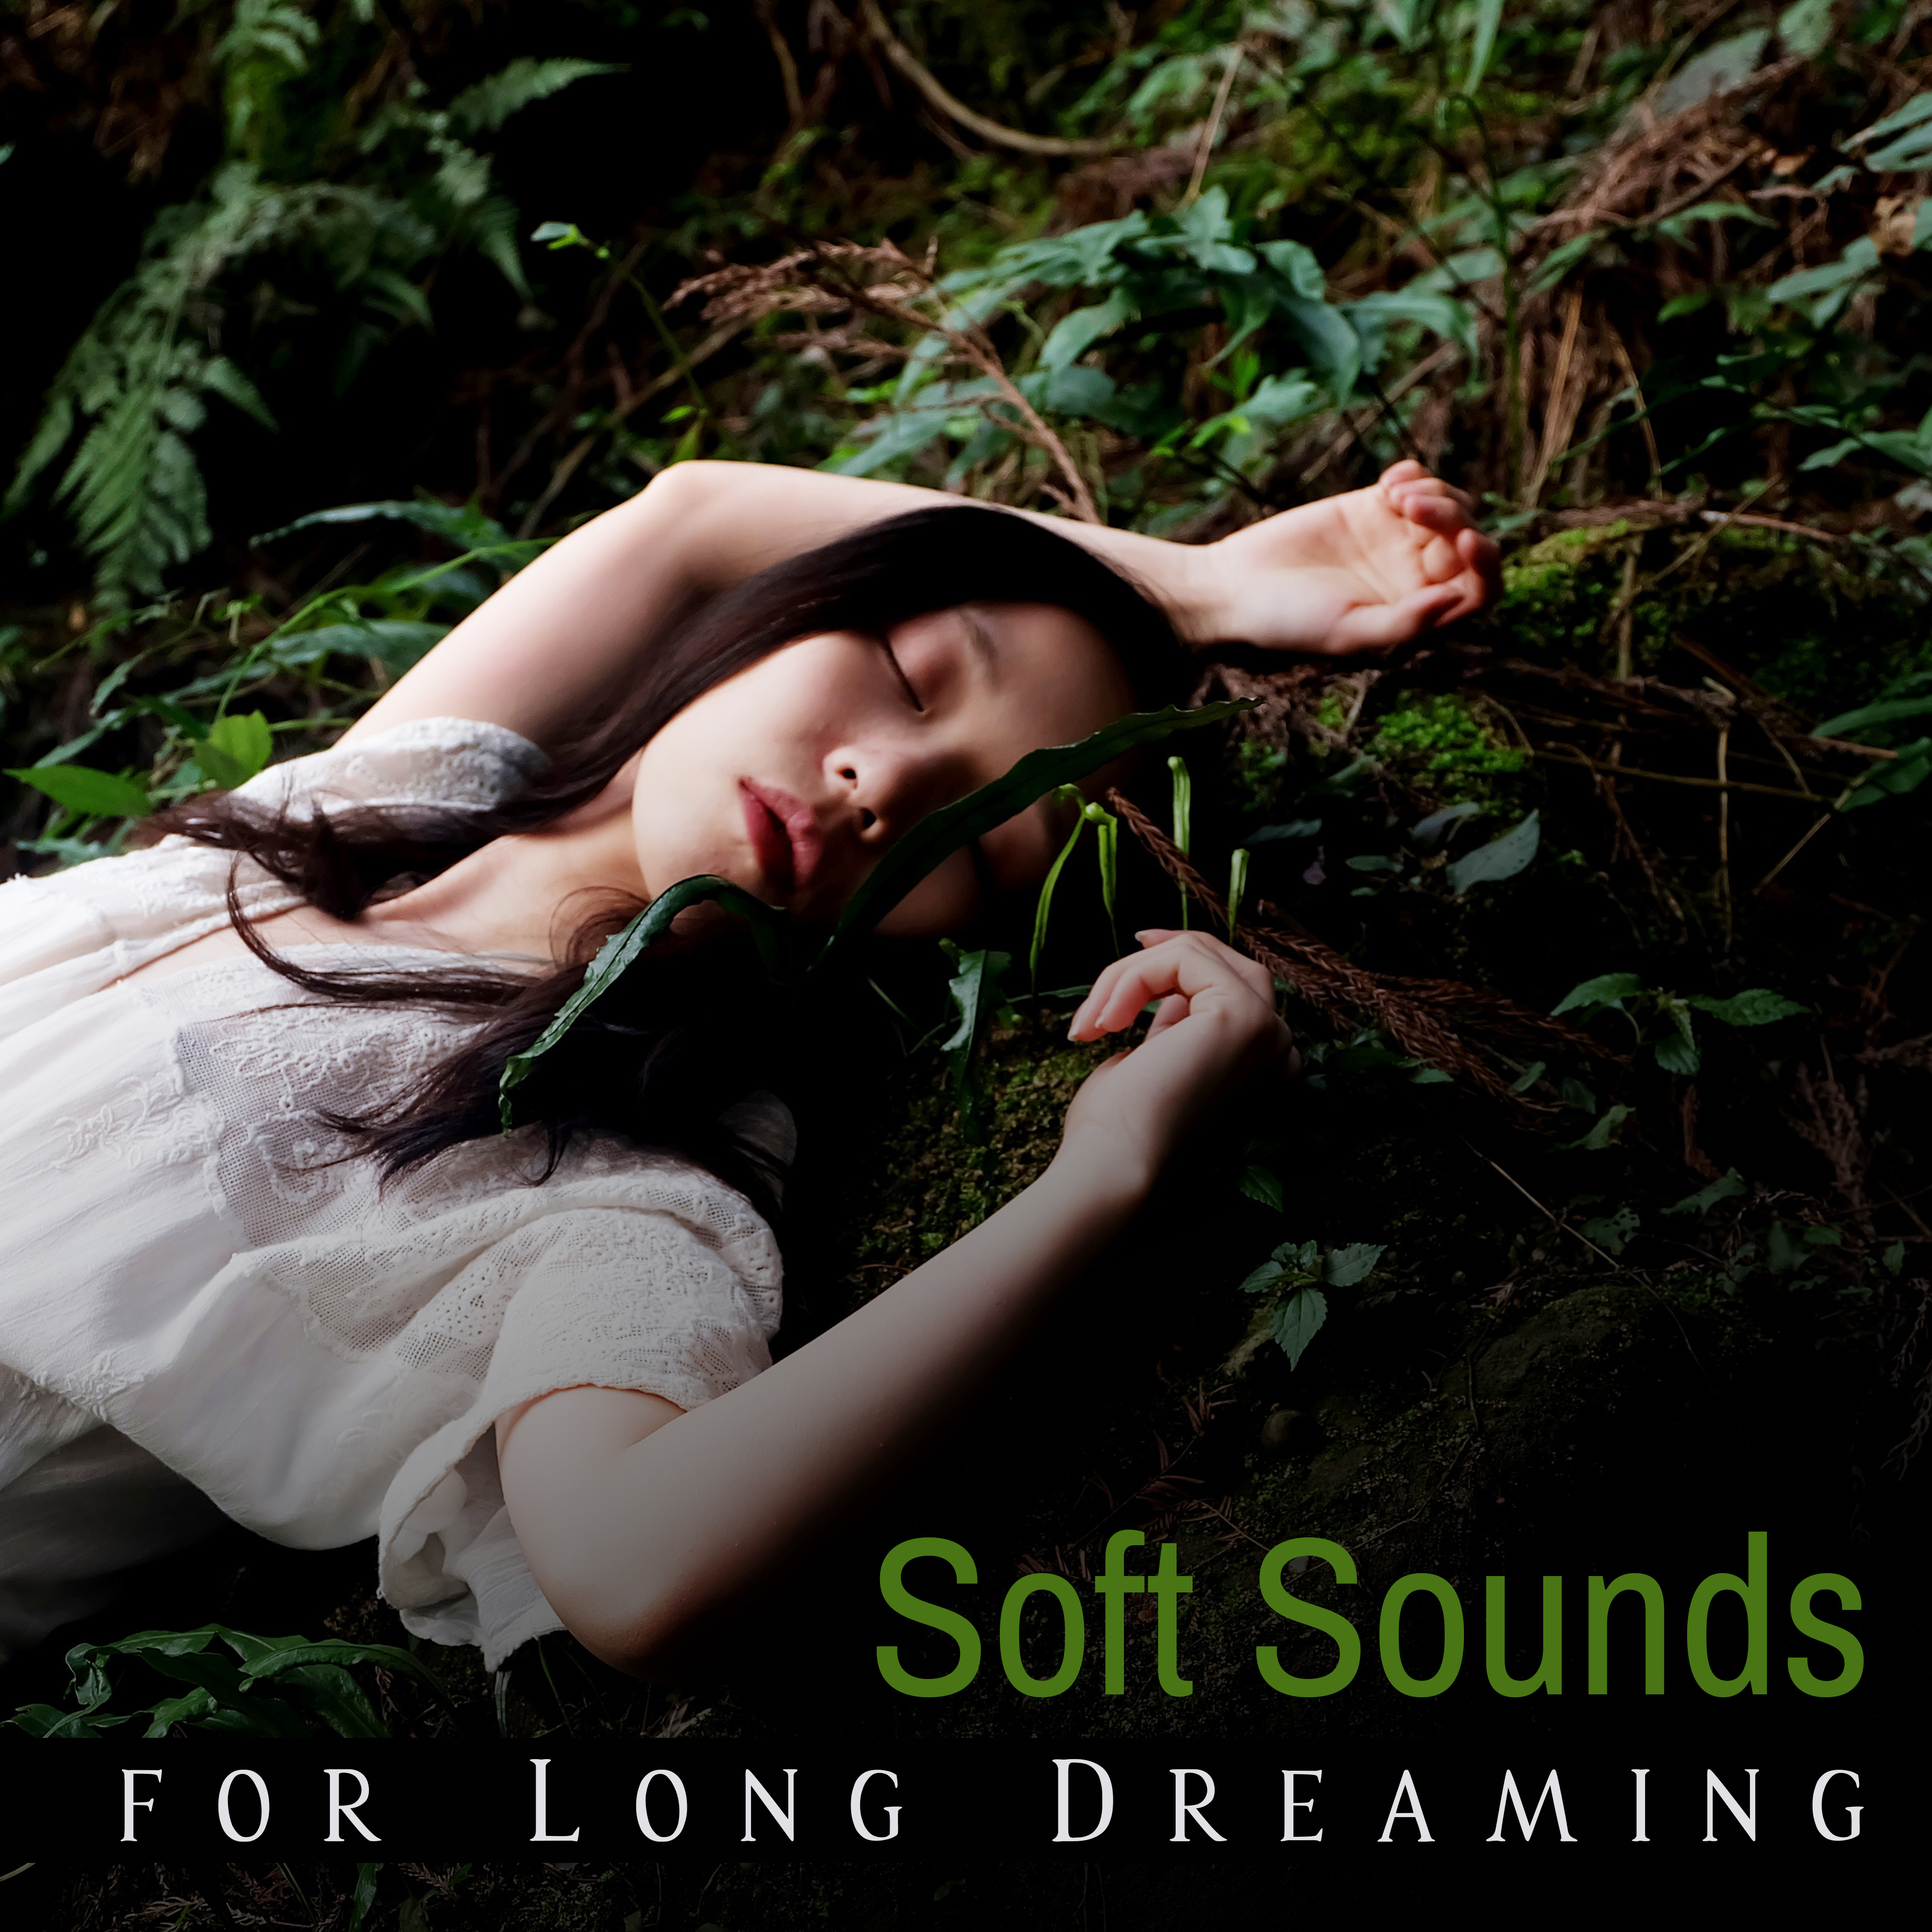 Soft Sounds for Long Dreaming – Easy Listening, Sleep All Night, Stress Relief, Peaceful Mind & Body, Relaxing New Age